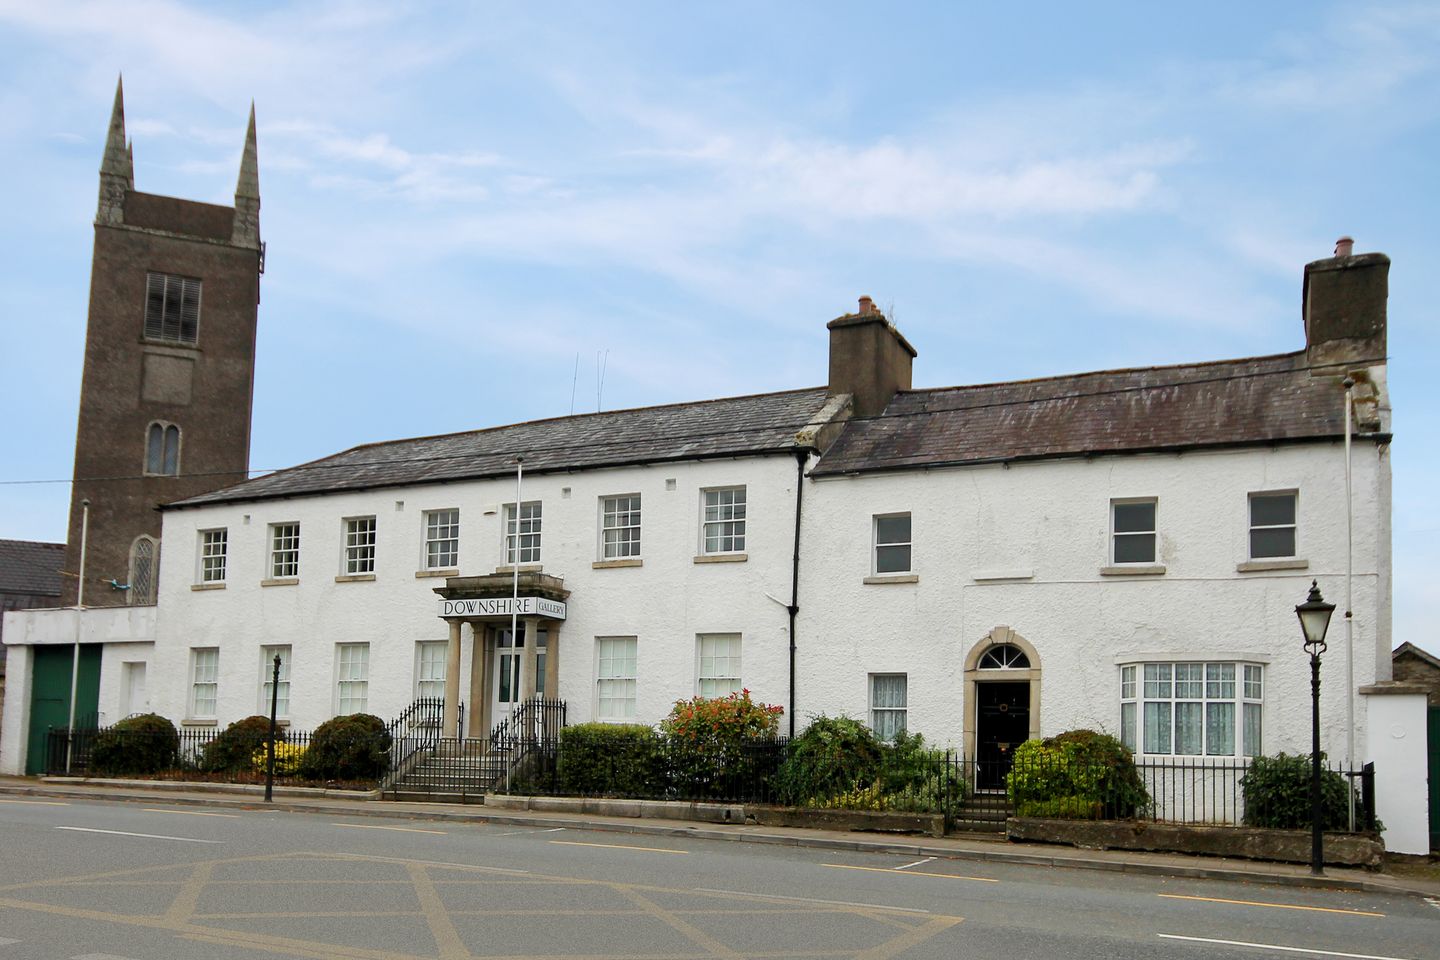 The Downshire Hotel, Main Street, Blessington, Co. Wicklow